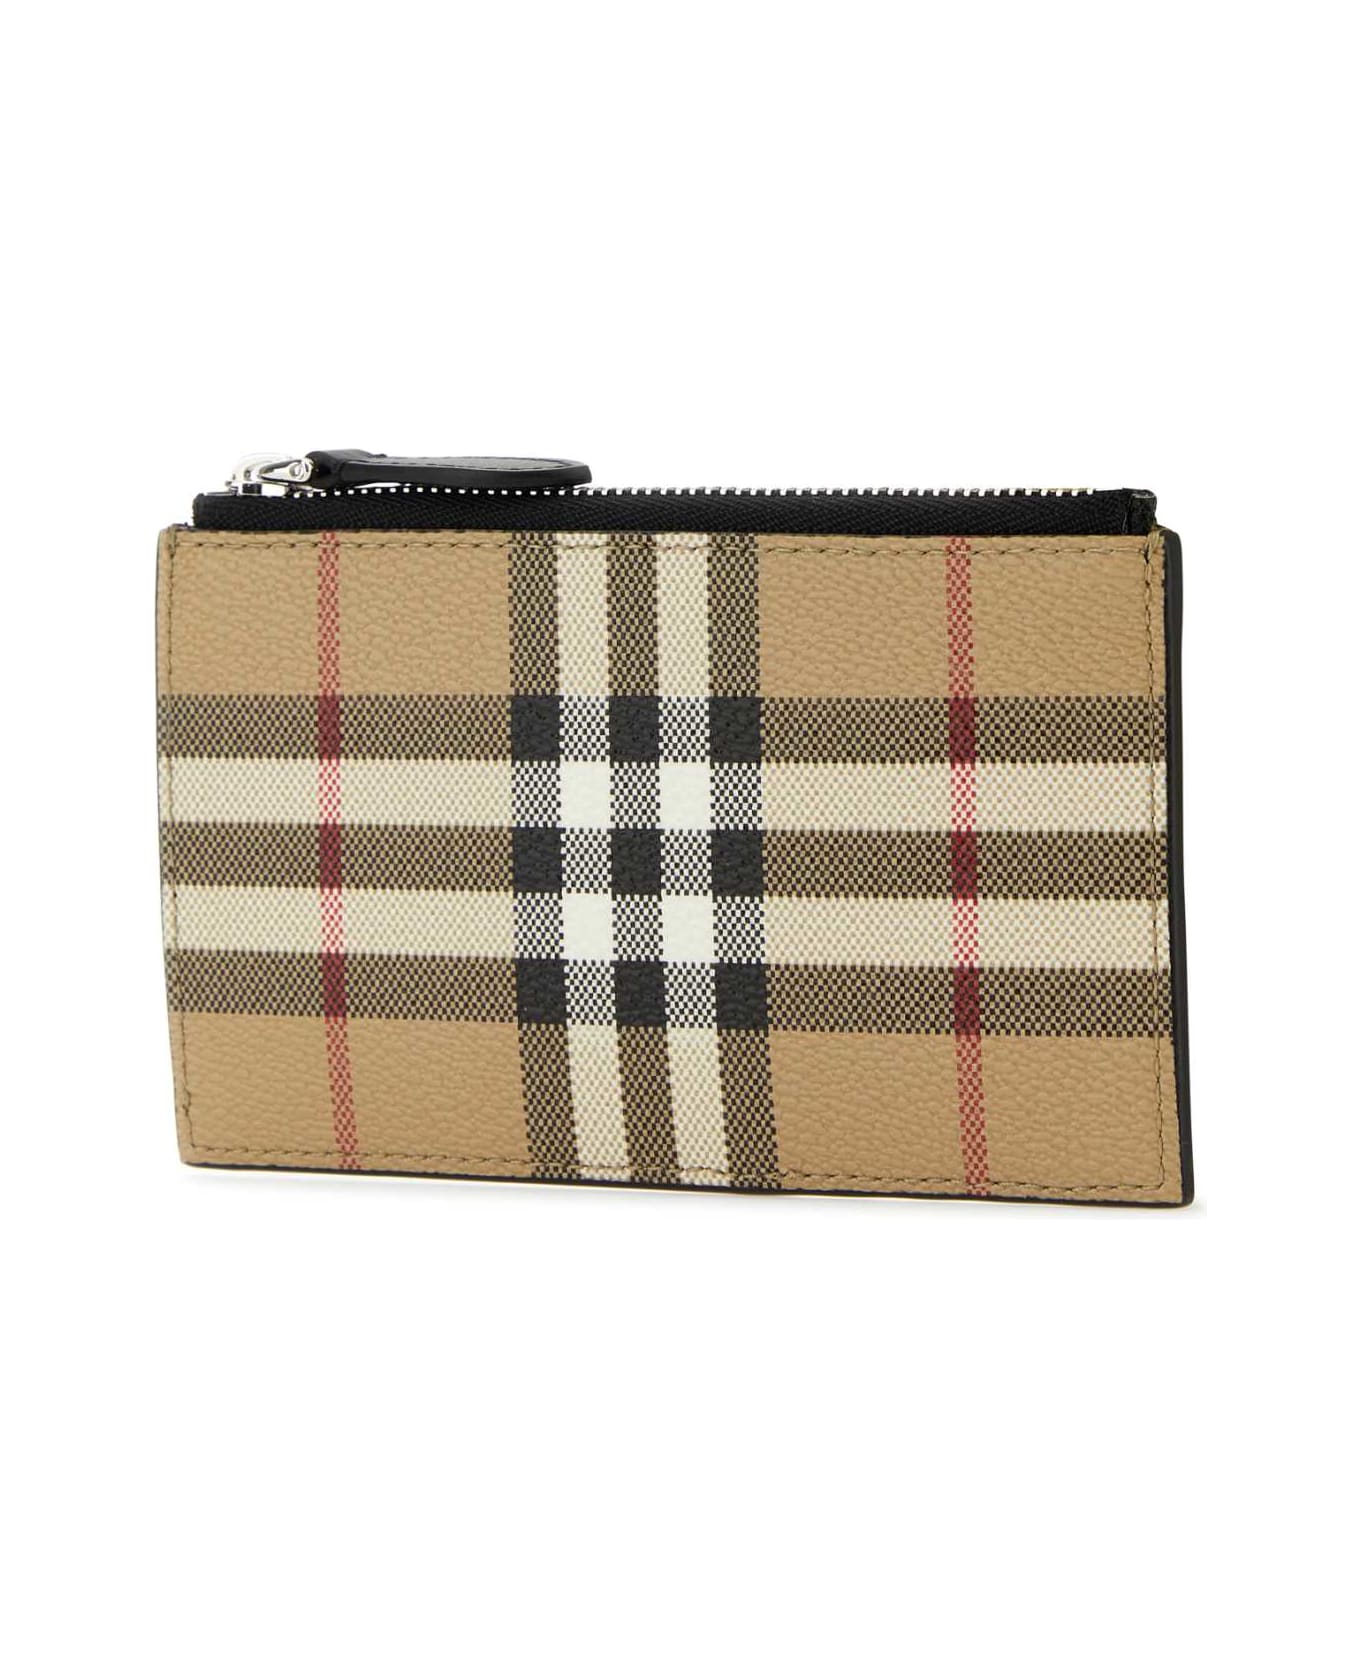 Burberry Printed Canvas Wallet - ARCHIVEBEIGE